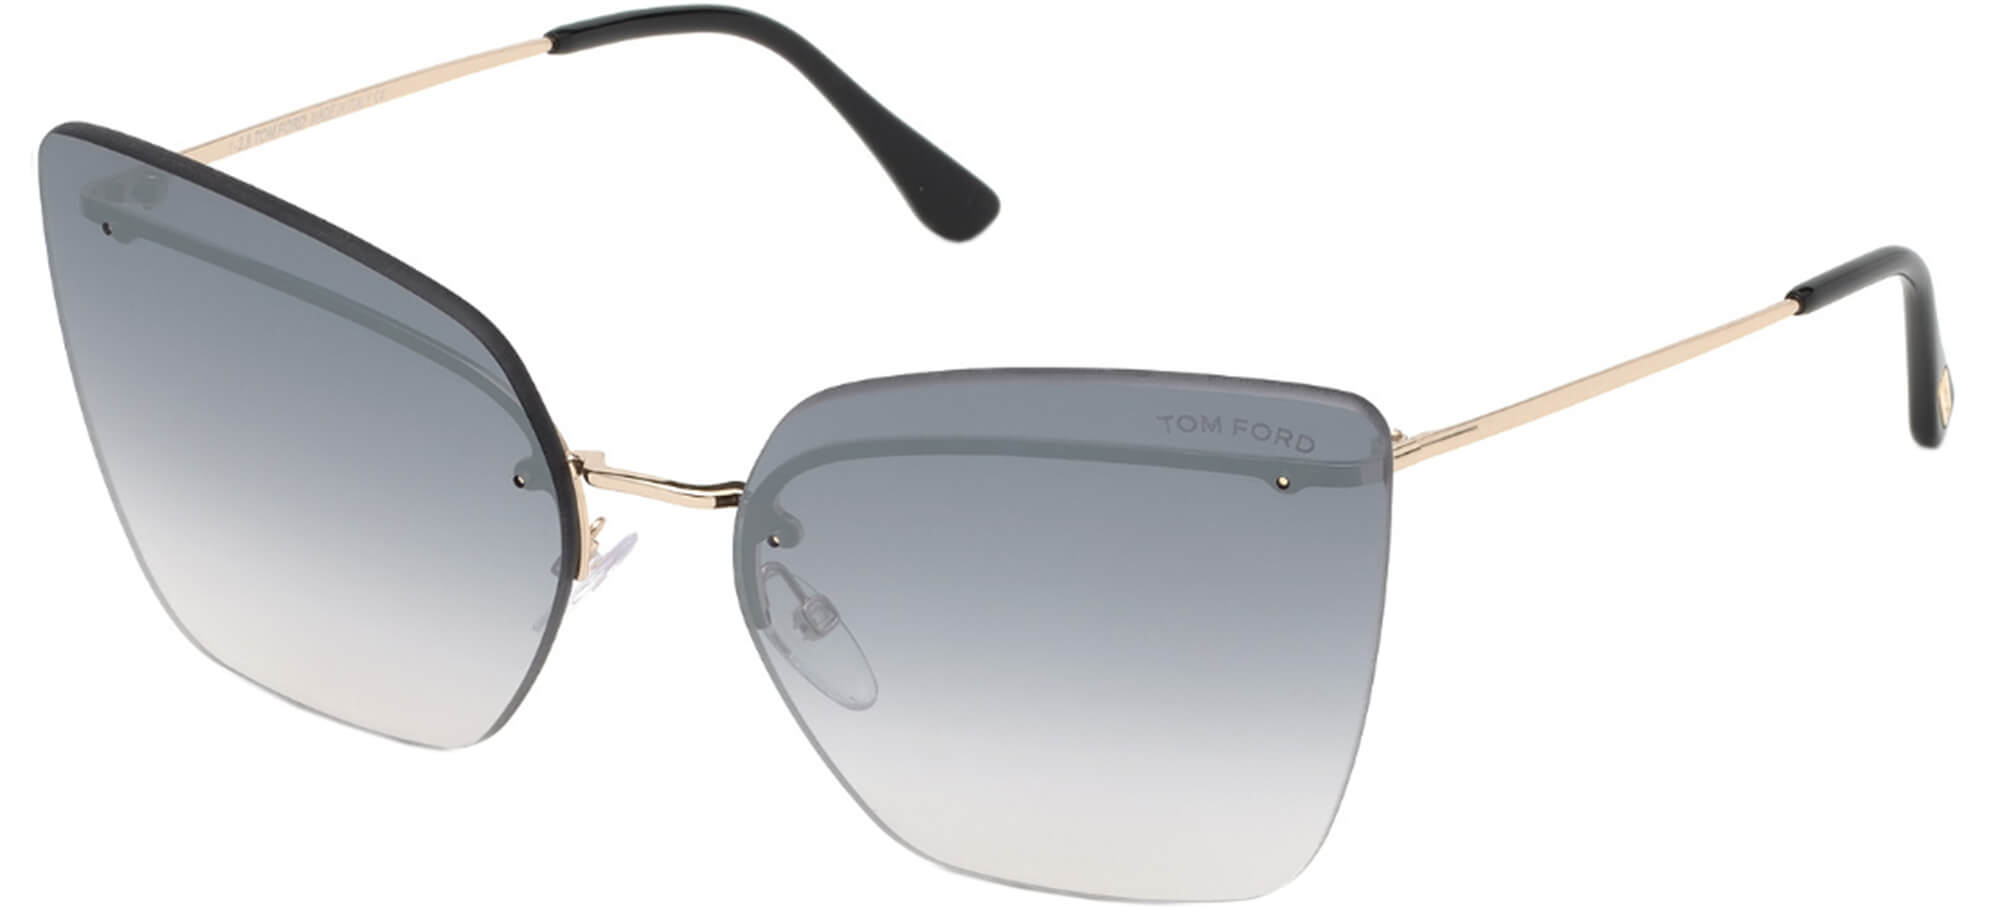 Tom FordCAMILLA-02 FT 0682Rose Gold/grey Shaded (28C A)